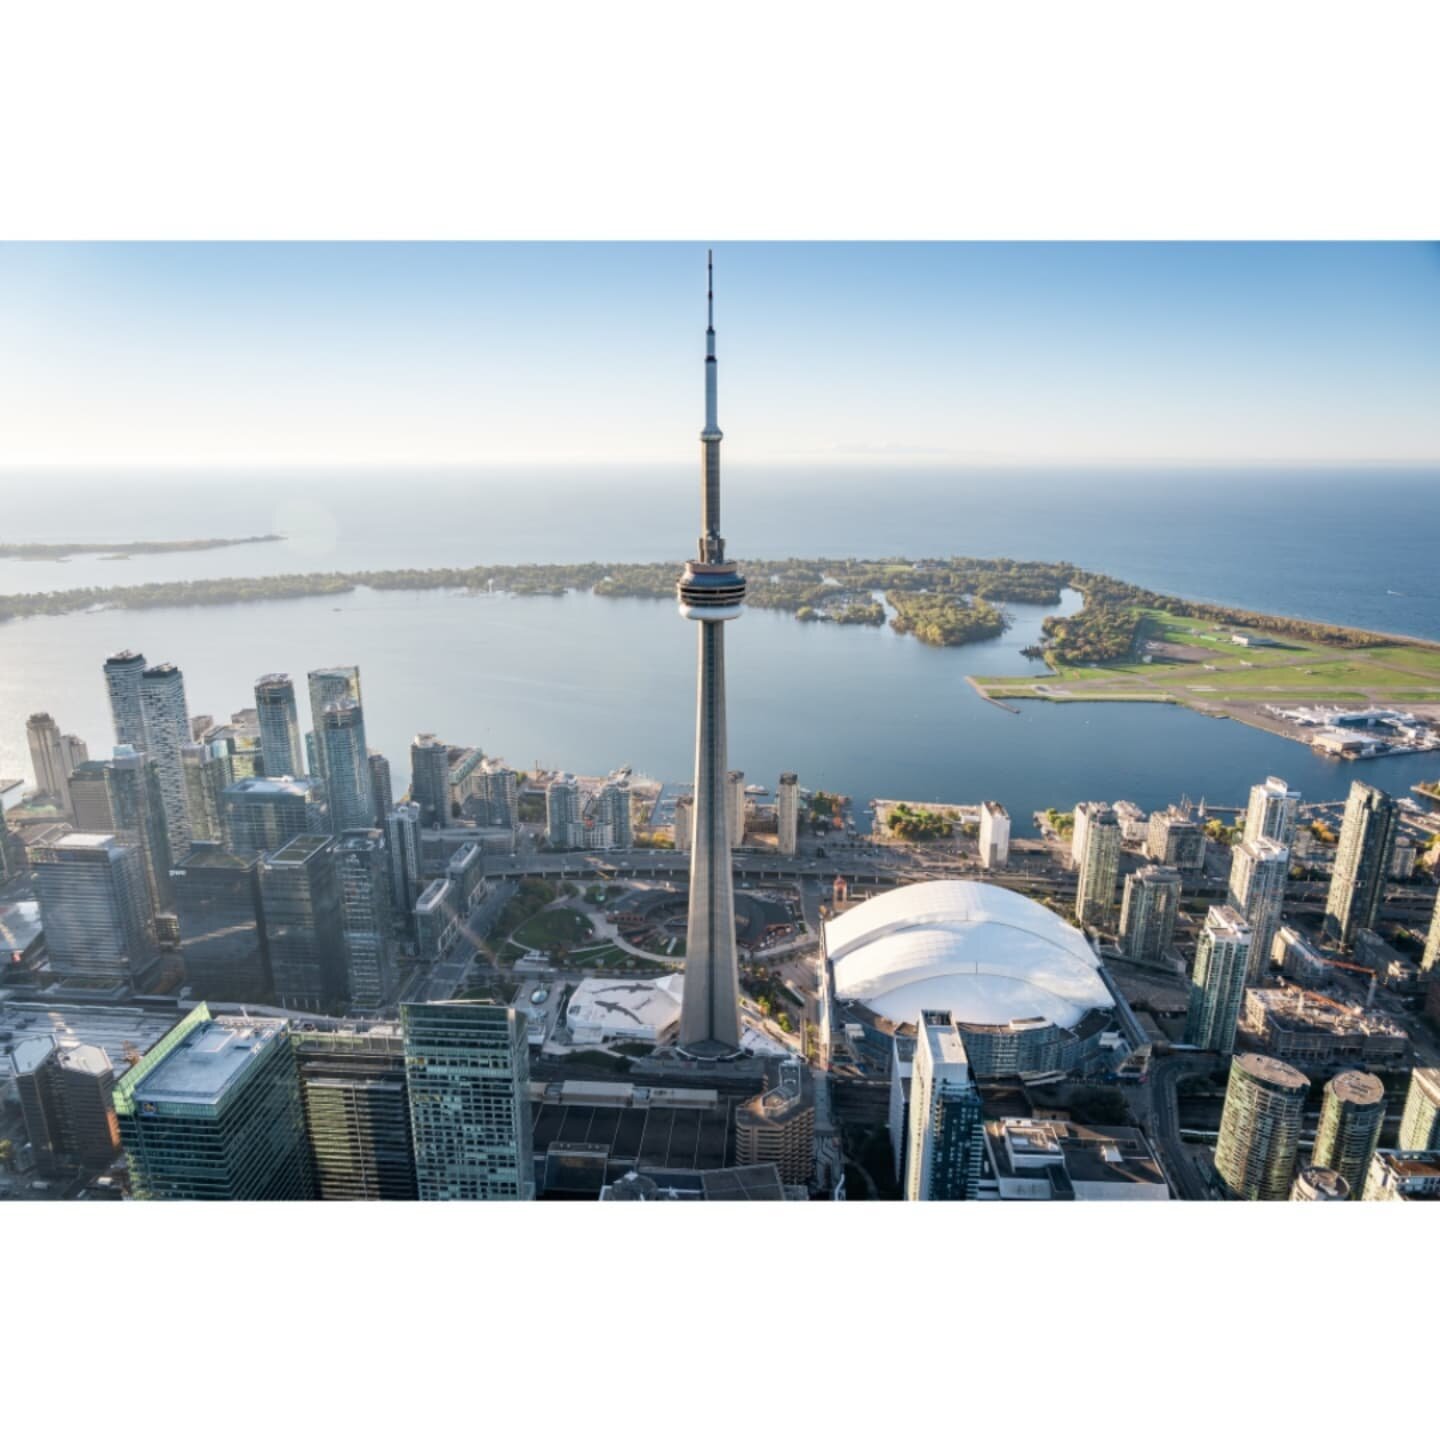 Gotta get my CN tower glamor shots in there 🌟
.
Aerial photography for @waterfront.to with @carolina_soderholm and flown in beautiful circles by Dave at @heliofaview. 
.
#cntower #aerialtoronto #toronto #waterfronttoronto #aerialphotography